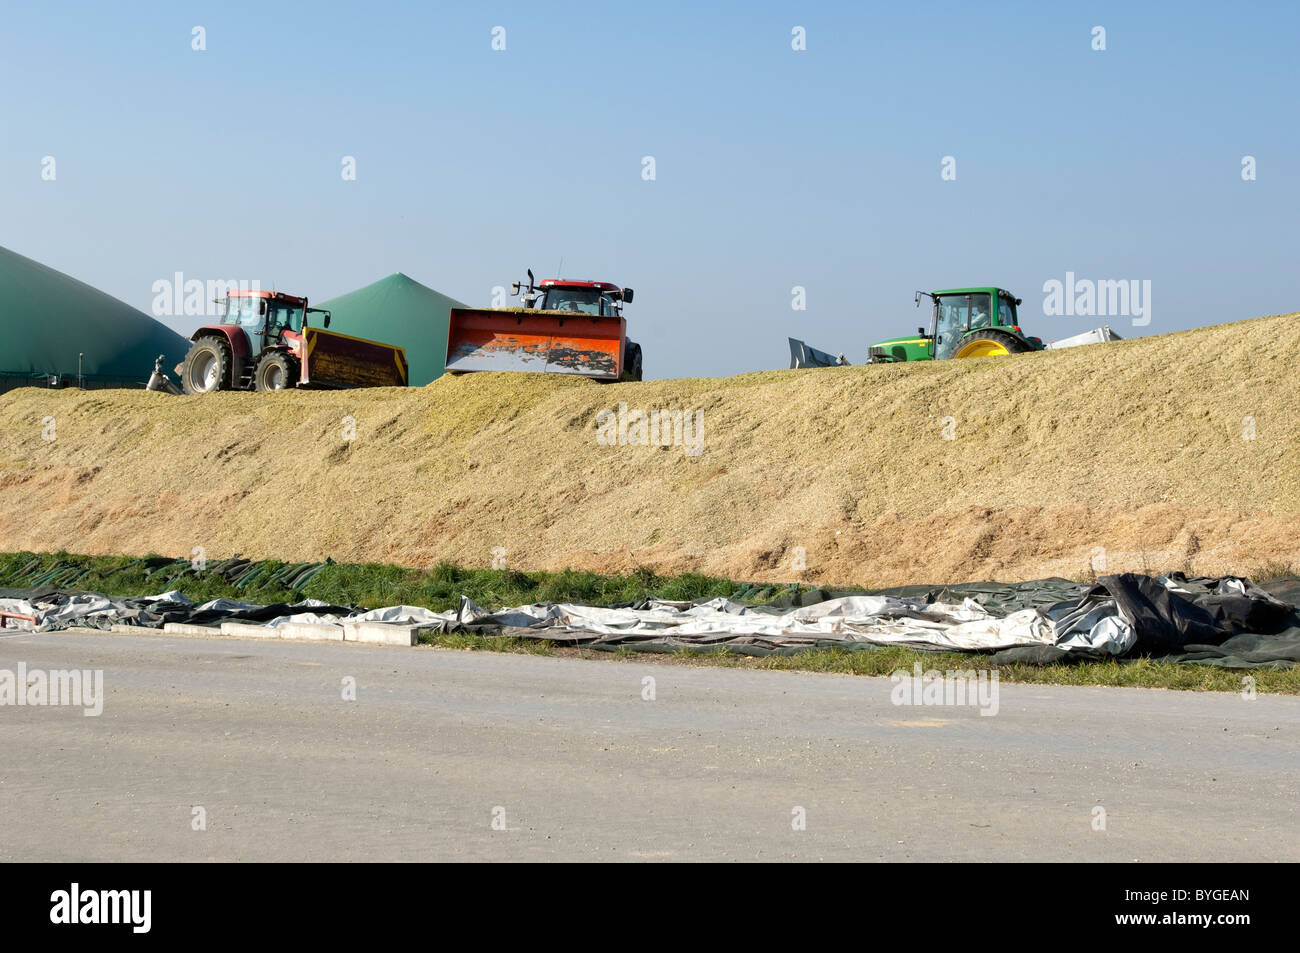 Maize, Corn (Zea mays). Freshly chopped maize in a large piles being compacted by caterpillar tractors to push out air. Stock Photo